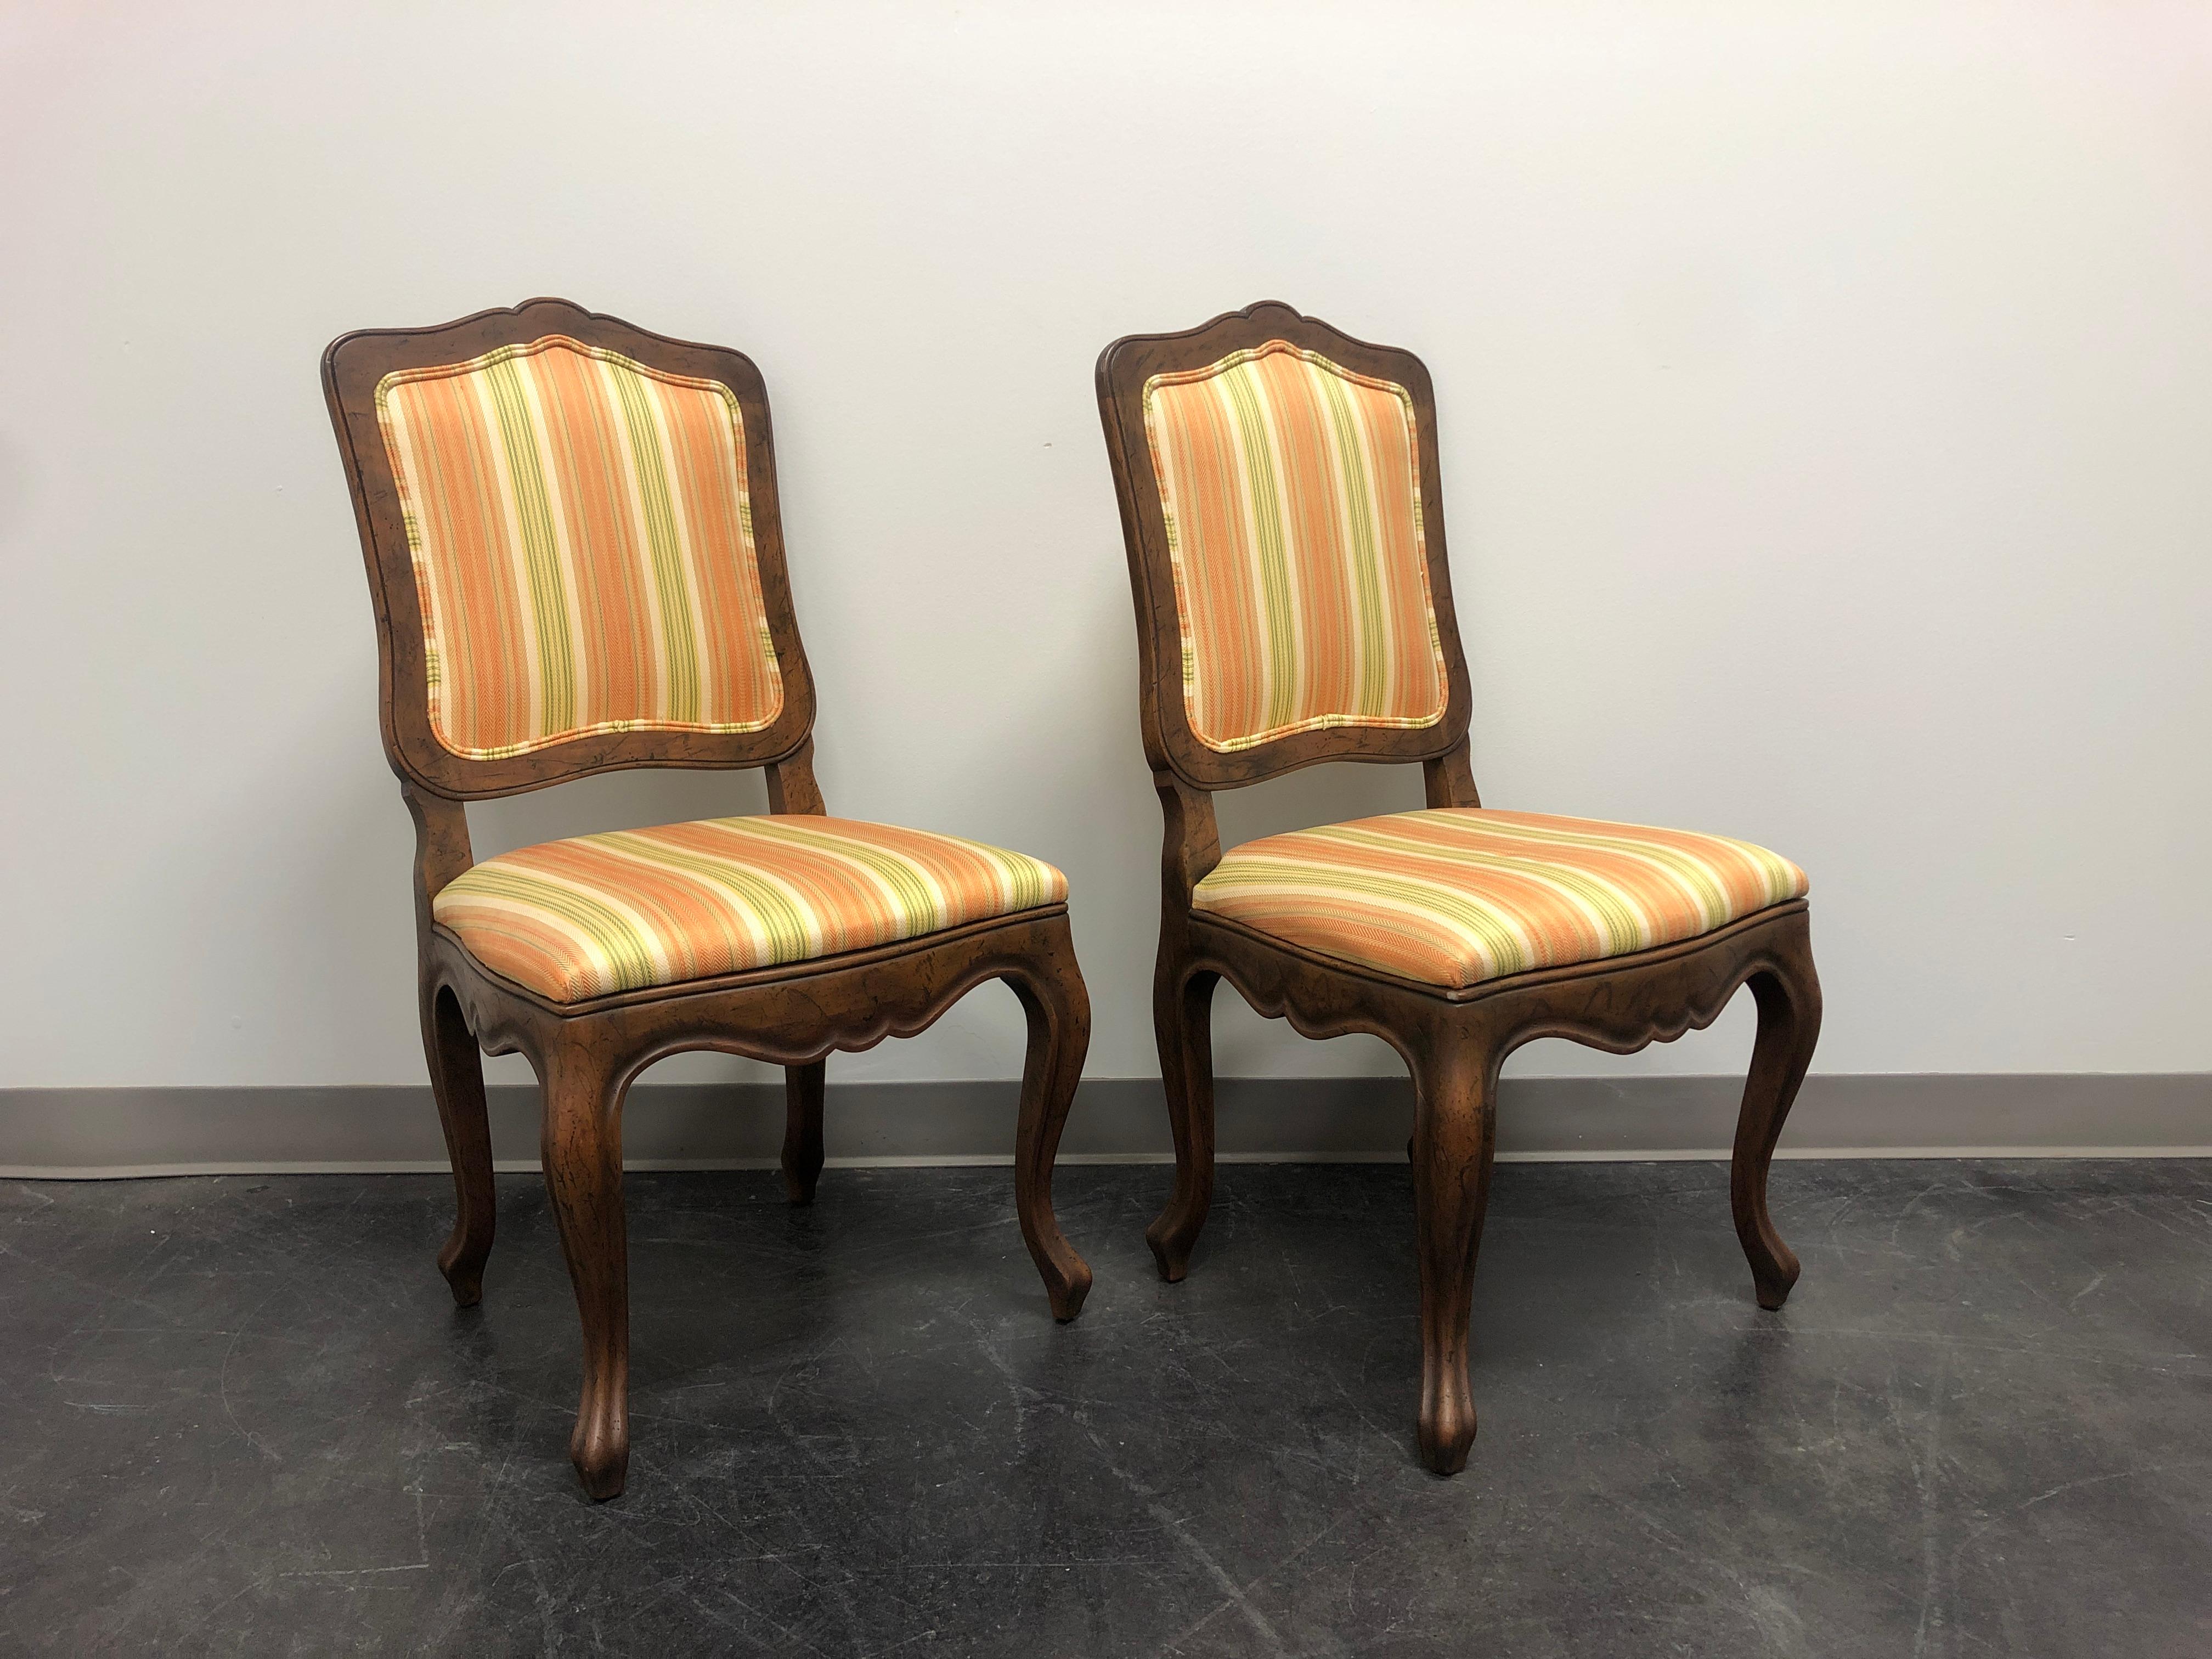 French Provincial BAKER French Country Style Dining Side Chairs - Pair C